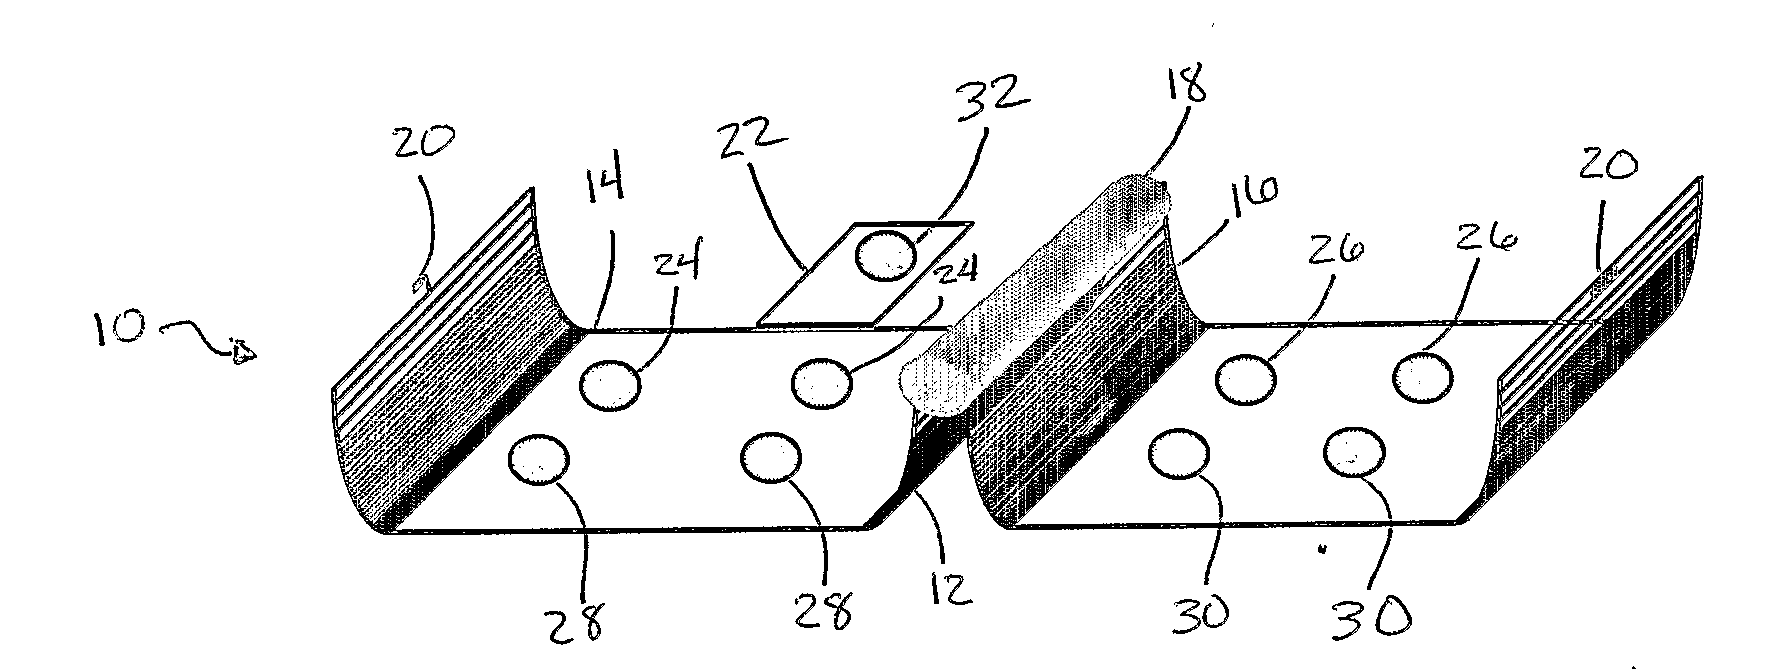 Electrotherapeutic Device